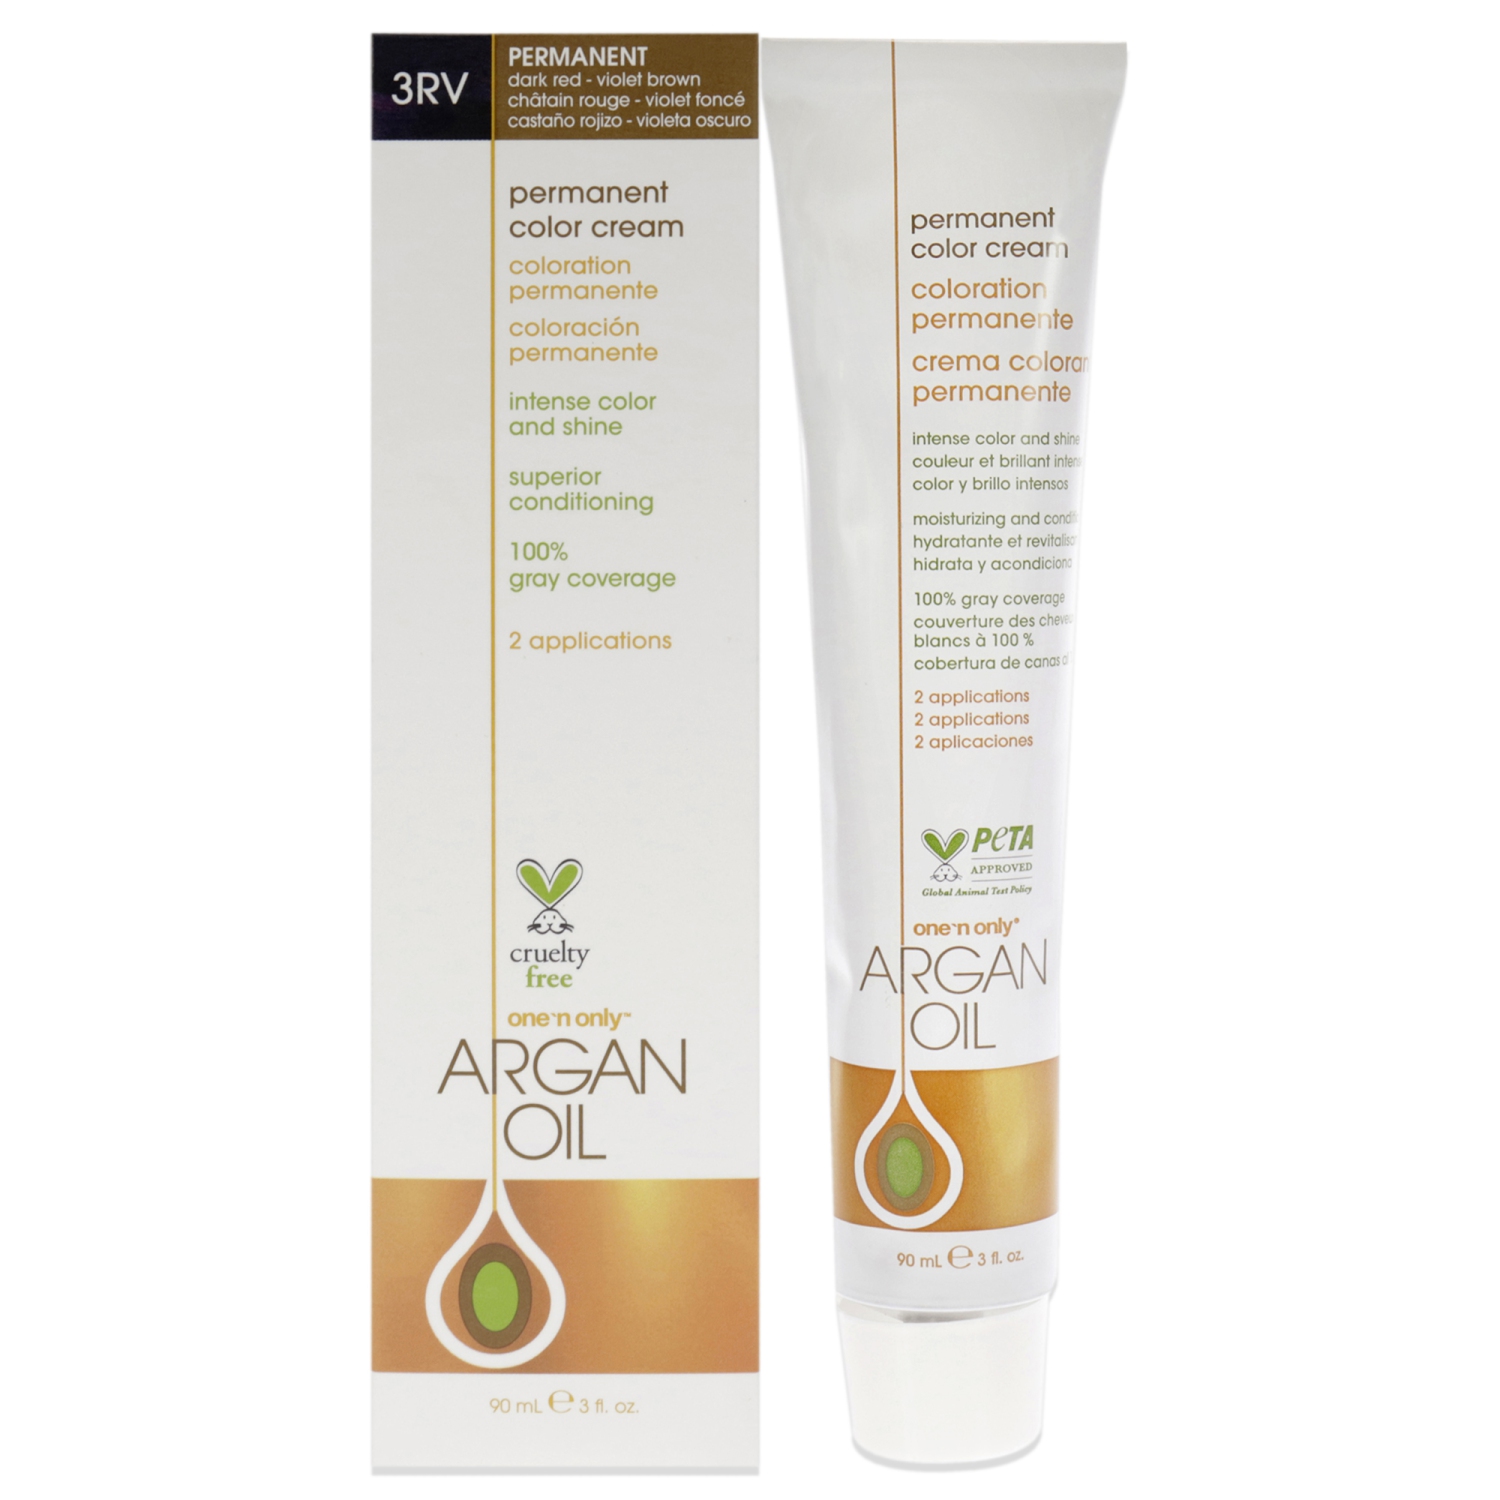 Argan Oil Permanent Color Cream - 3RV Dark Red Violet Brown by One n Only for Unisex - 3 oz Hair Color